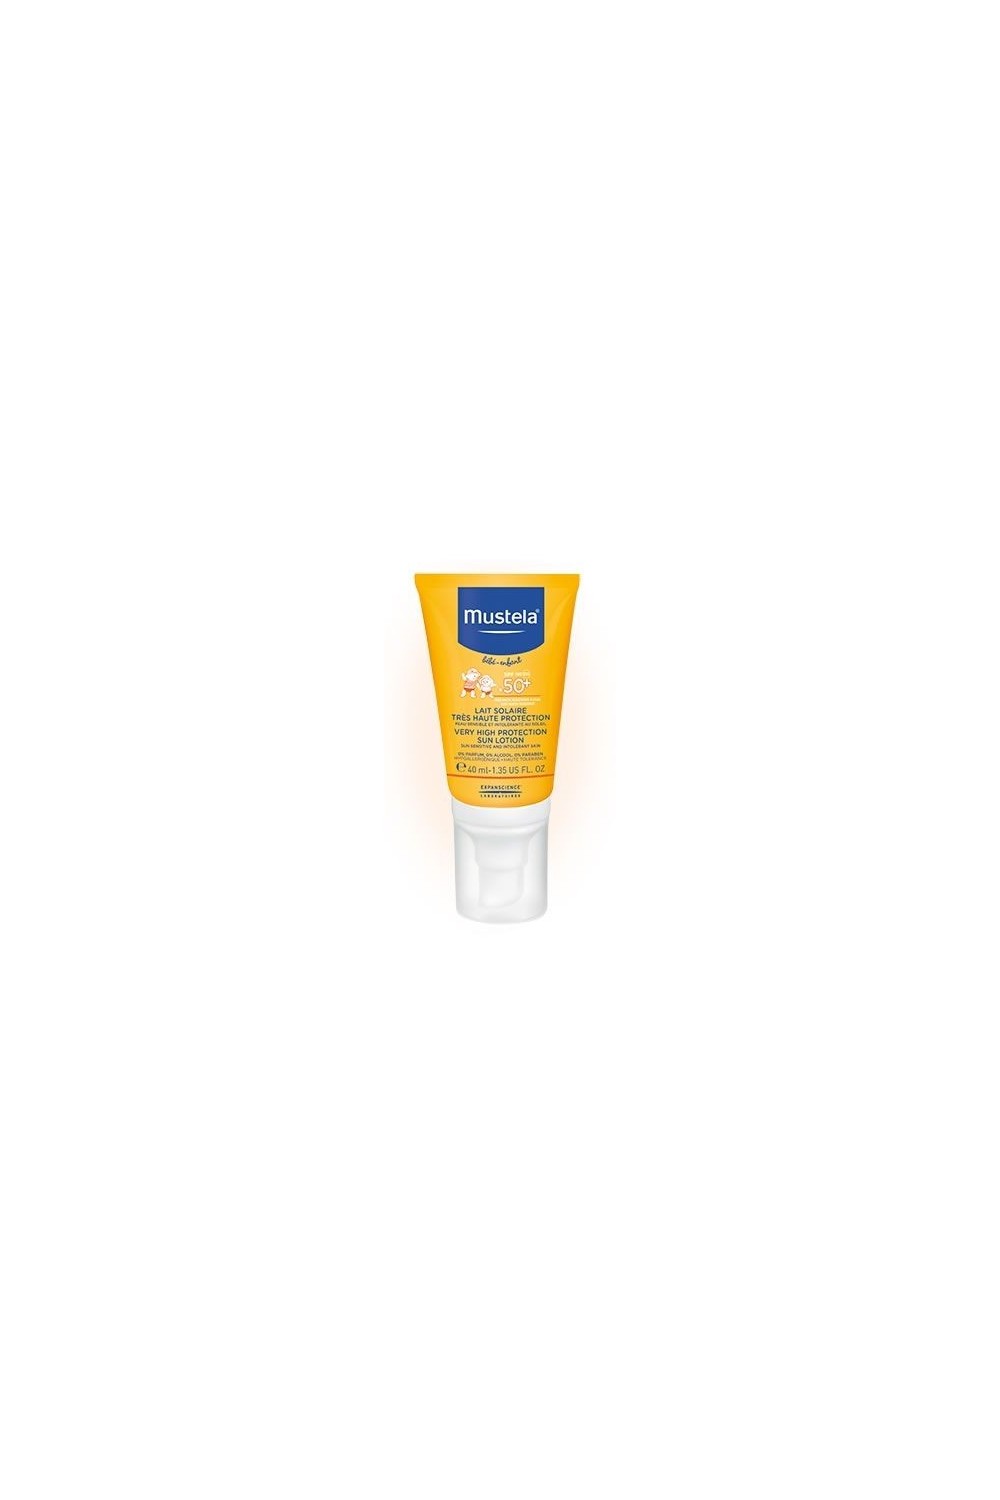 Mustela Baby Spf50+ Very High Protection Sun Lotion 40ml